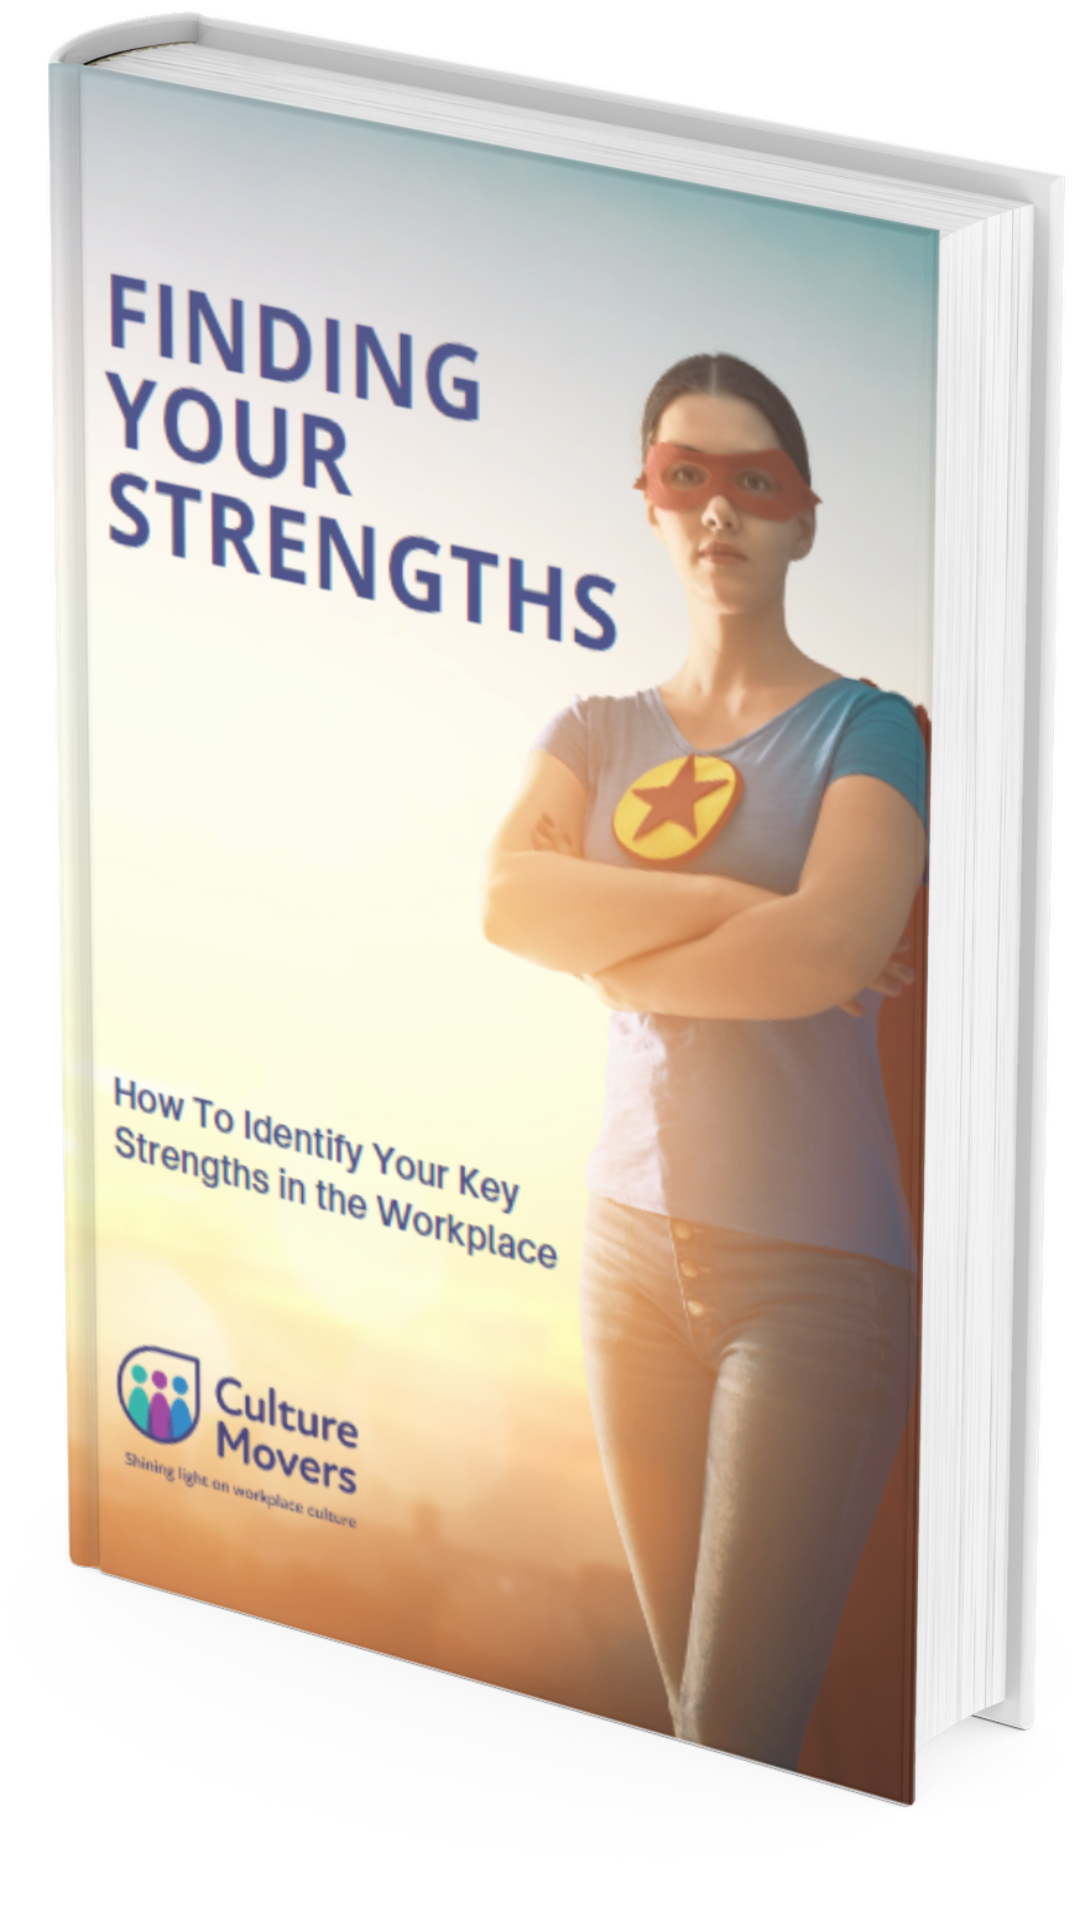 Strengths book download